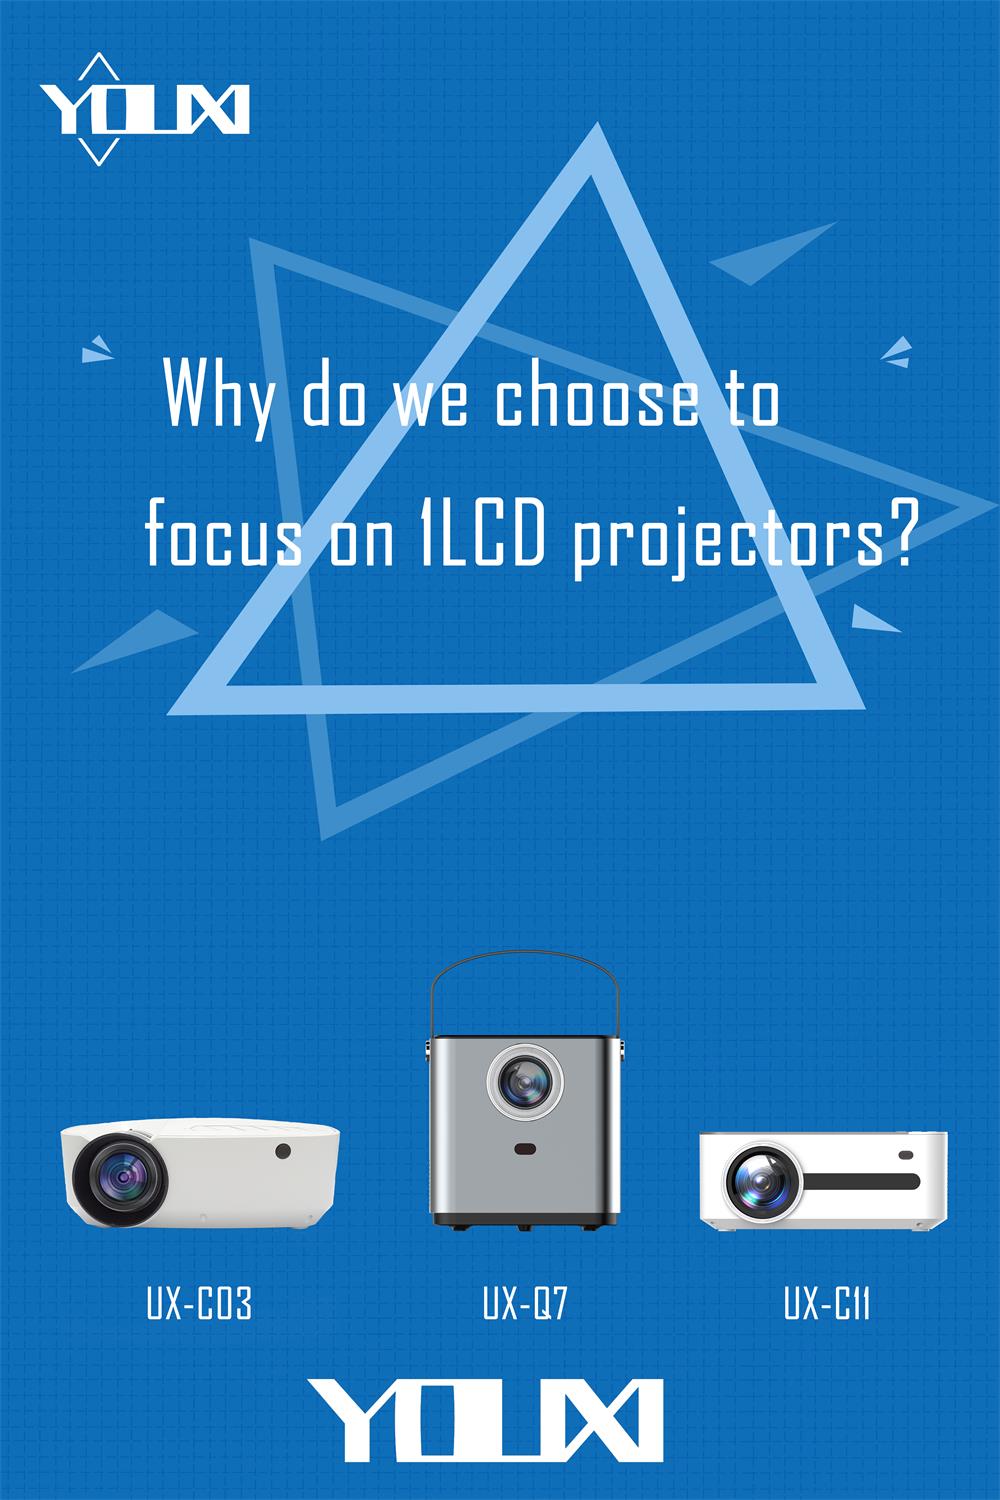 Why do we choose to focus on 1LCD projectors?